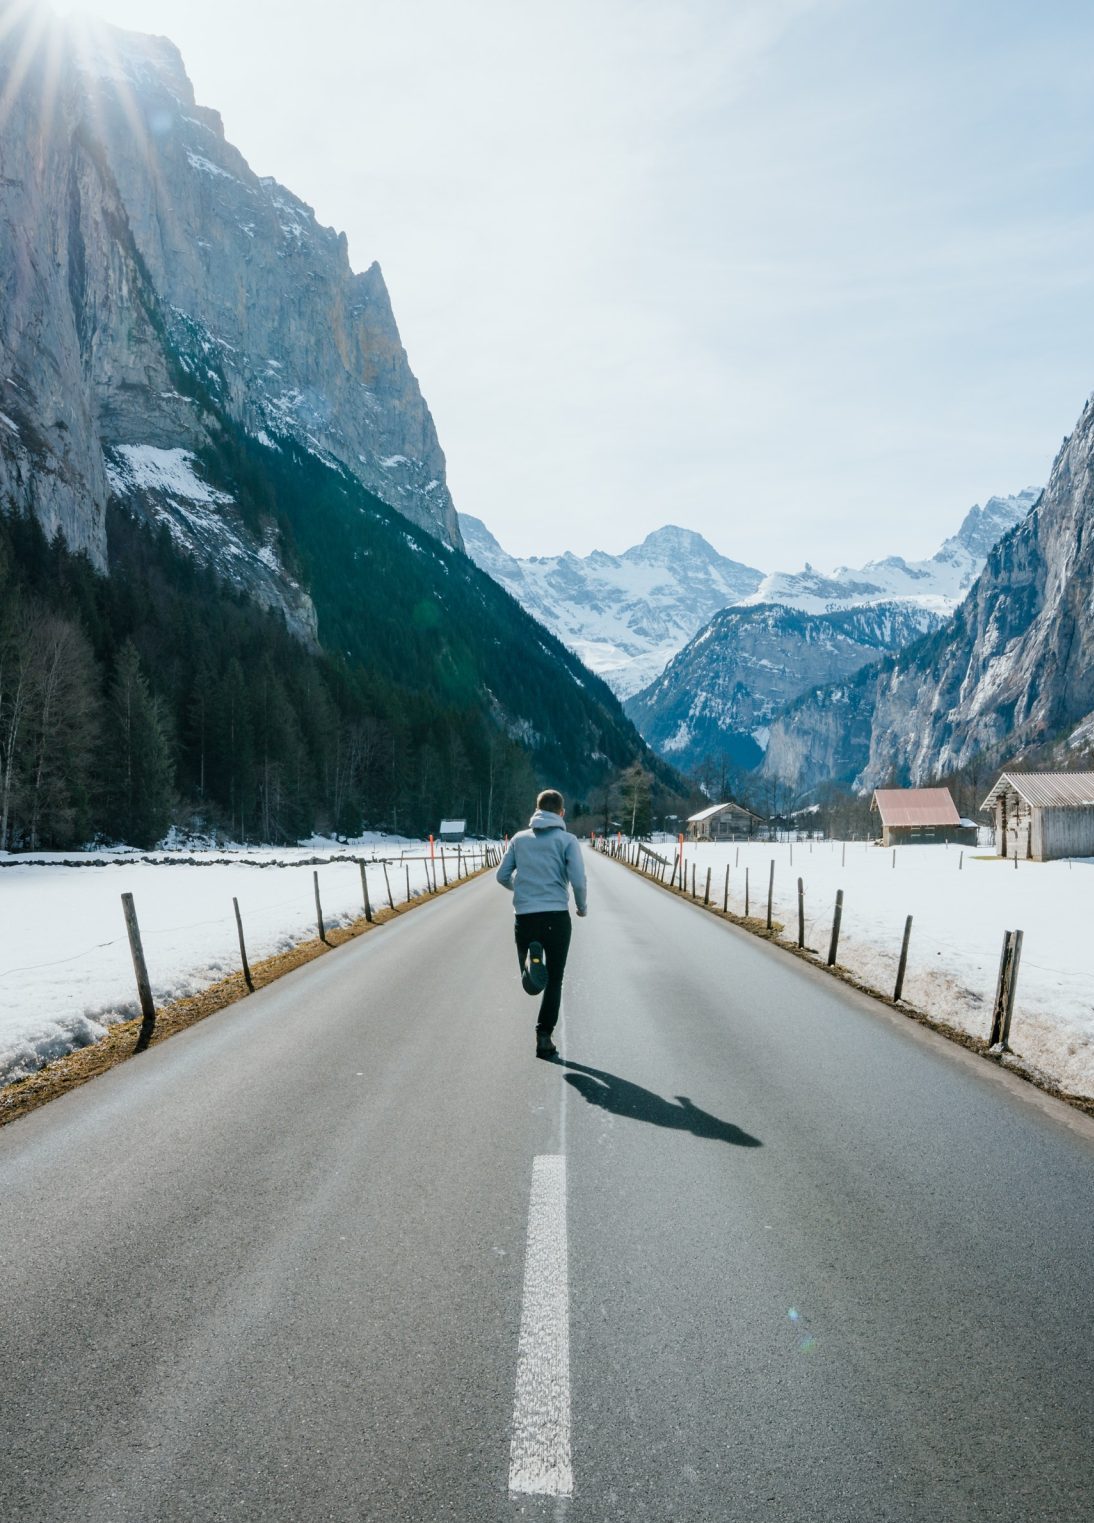 Runner on an empty road in a beautiful mountain scenery